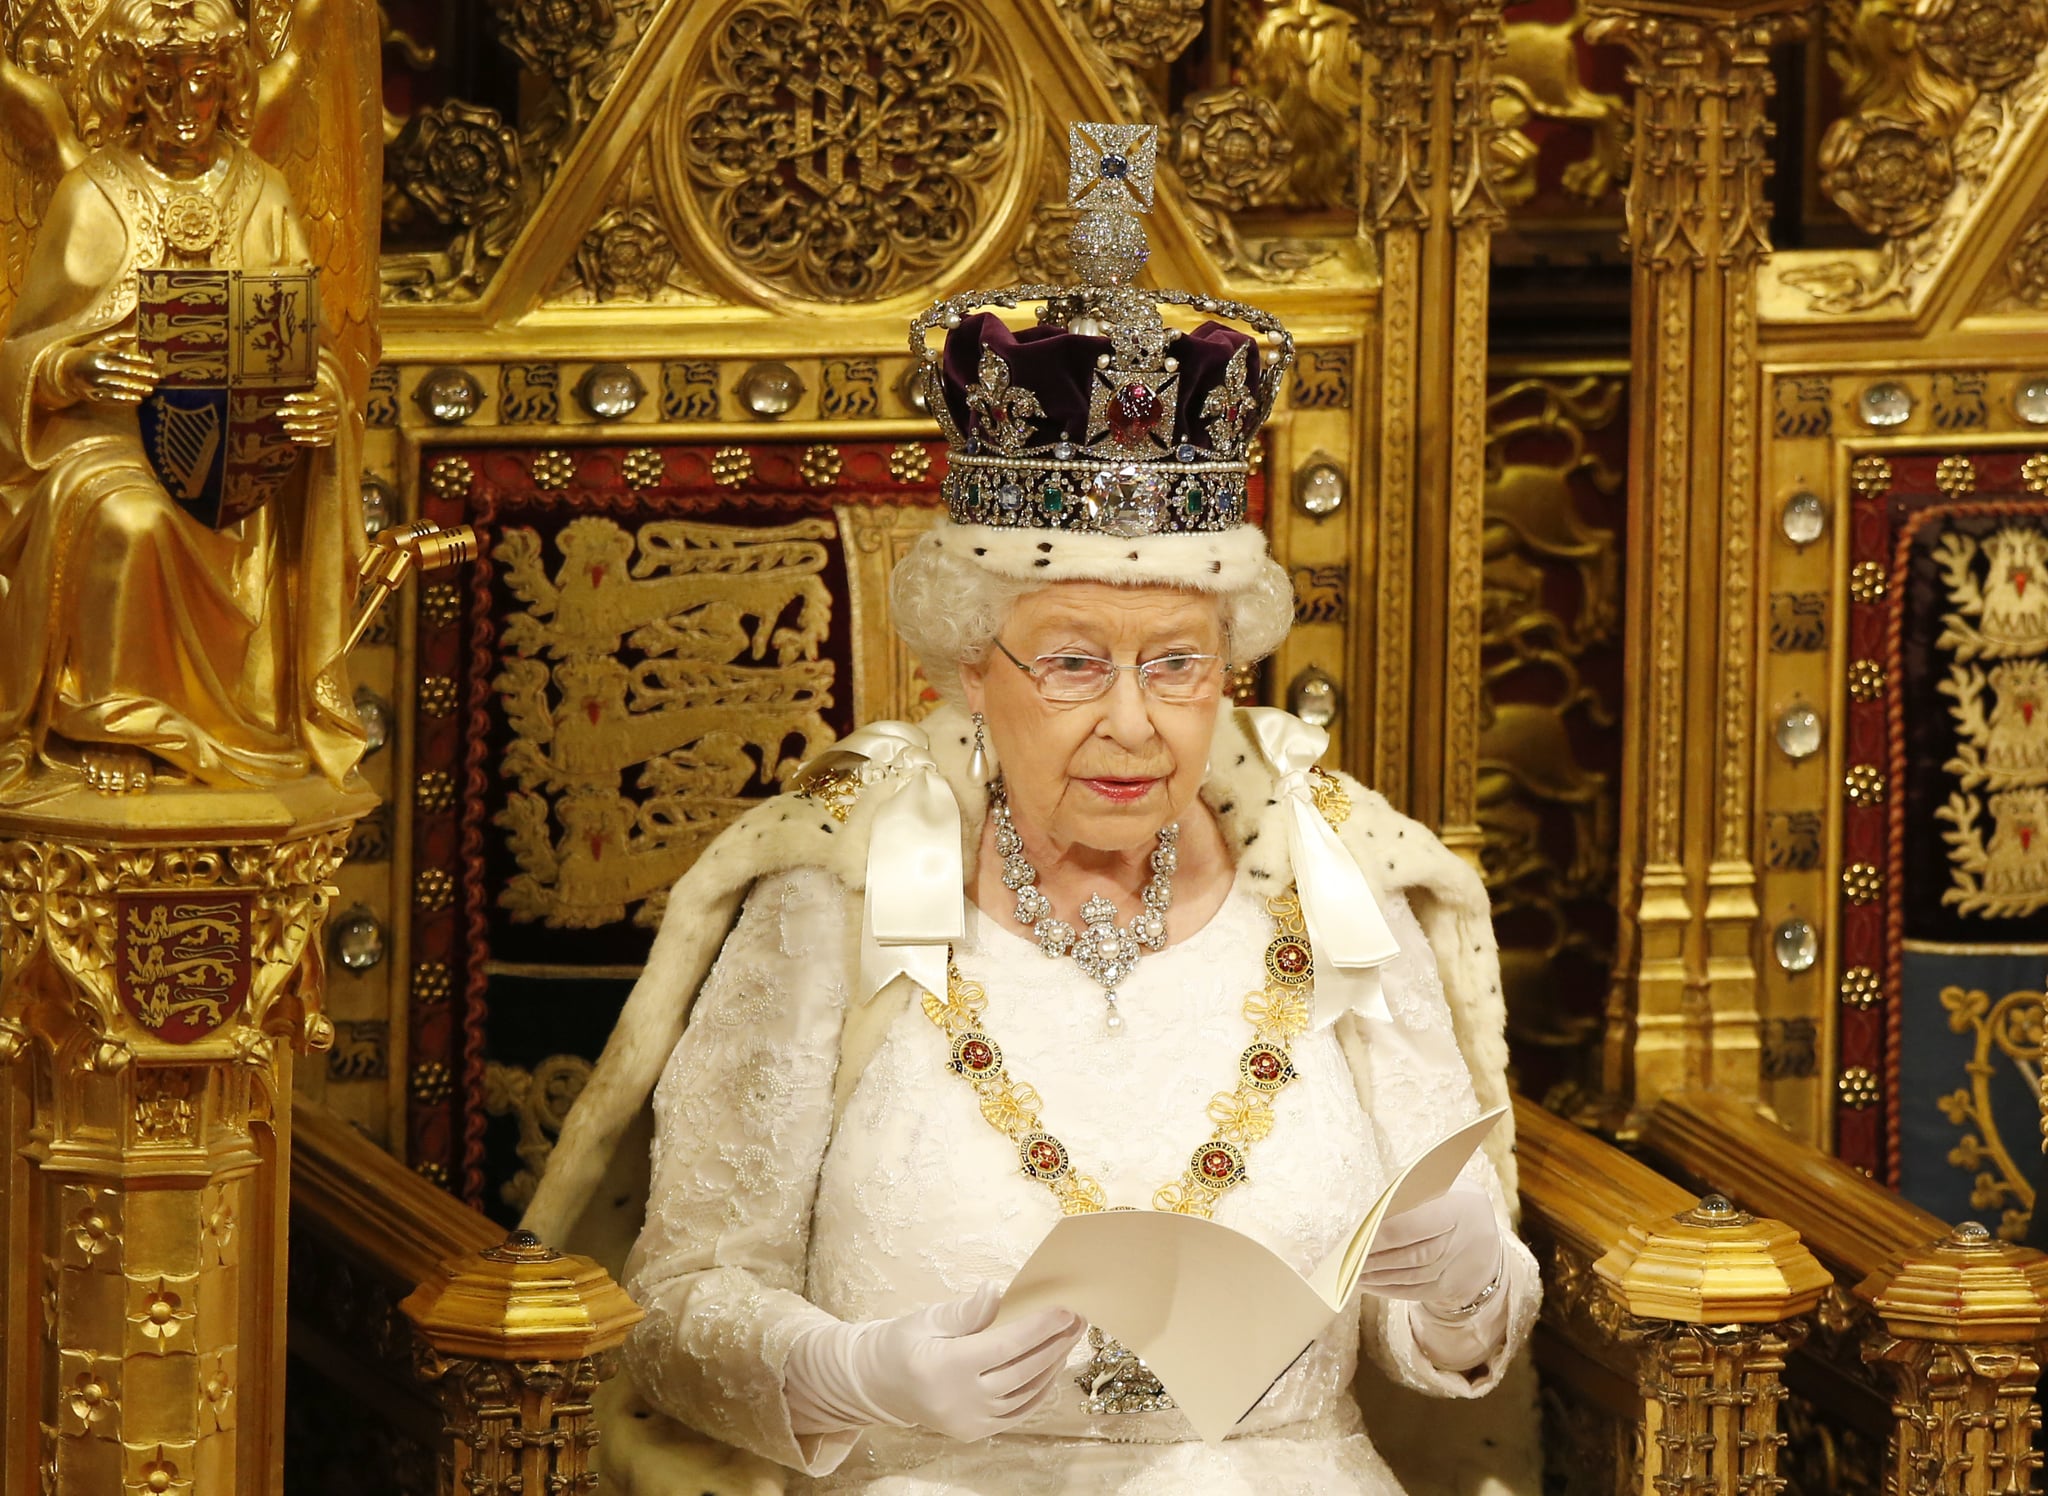 LONDON, ENGLAND - MAY 18:  Queen Elizabeth II reads the Queen's Speech from the throne during State Opening of Parliament in the House of Lords at the Palace of Westminster on May 18, 2016 in London, England. The State Opening of Parliament is the formal start of the parliamentary year. This year's Queen's Speech, setting out the government's agenda for the coming session, is expected to outline policy on prison reform, tuition fee rises and reveal the potential site of a UK spaceport. (Photo by Alastair Grant - WPA Pool/Getty Images)